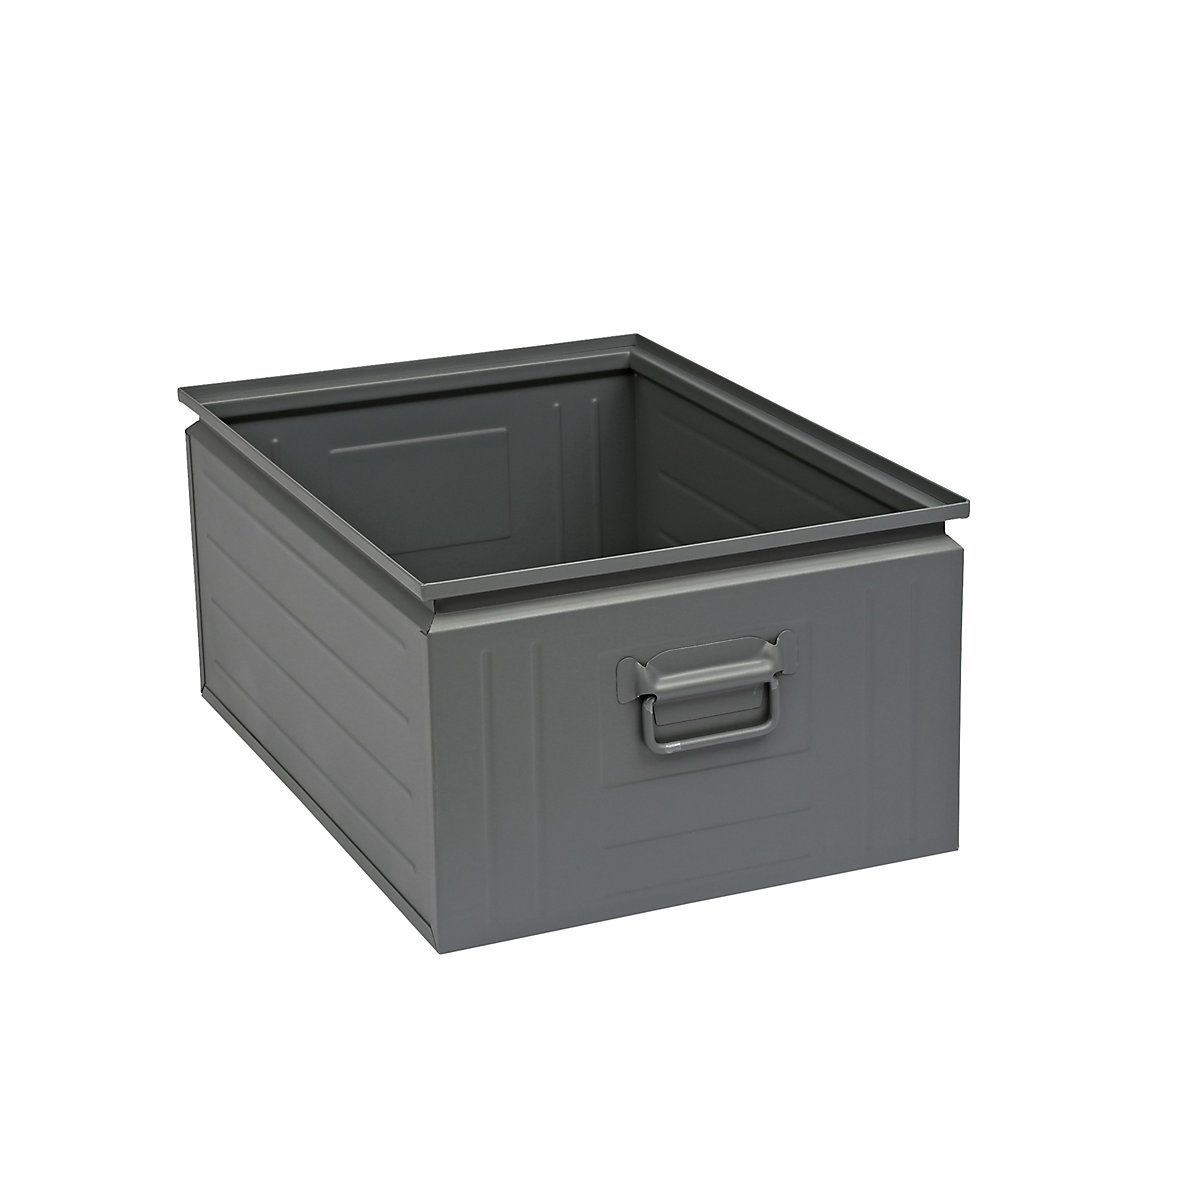 Stacking container made of sheet steel